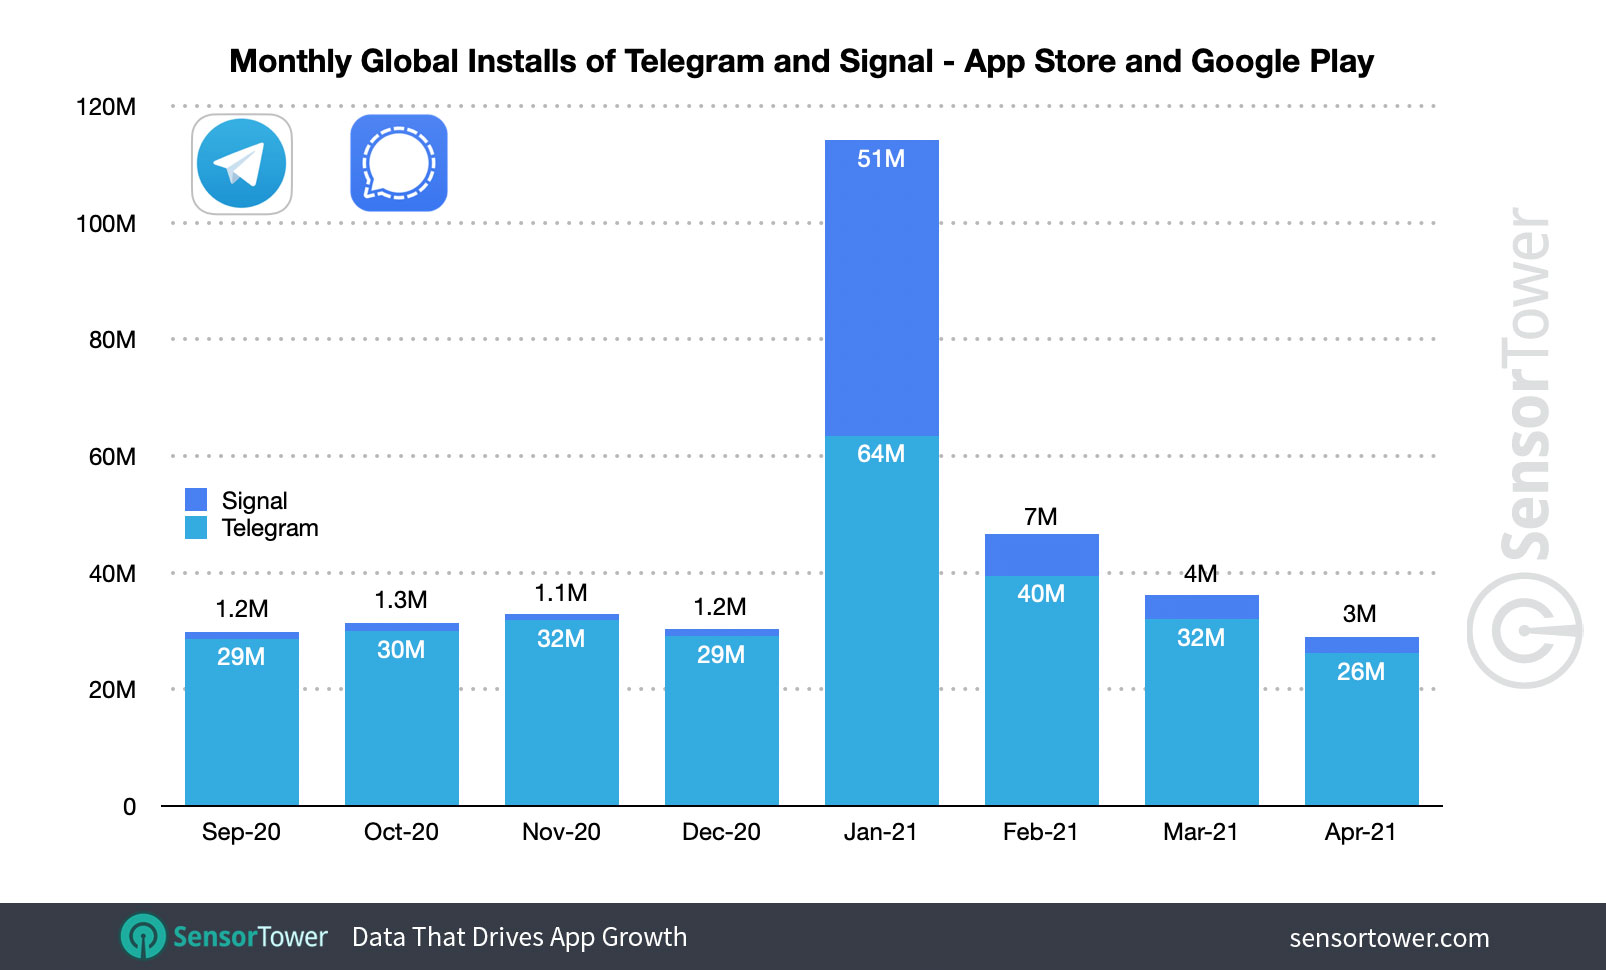 After a surge of adoption in January 2021, Telegram and Signal's installs are normalizing.